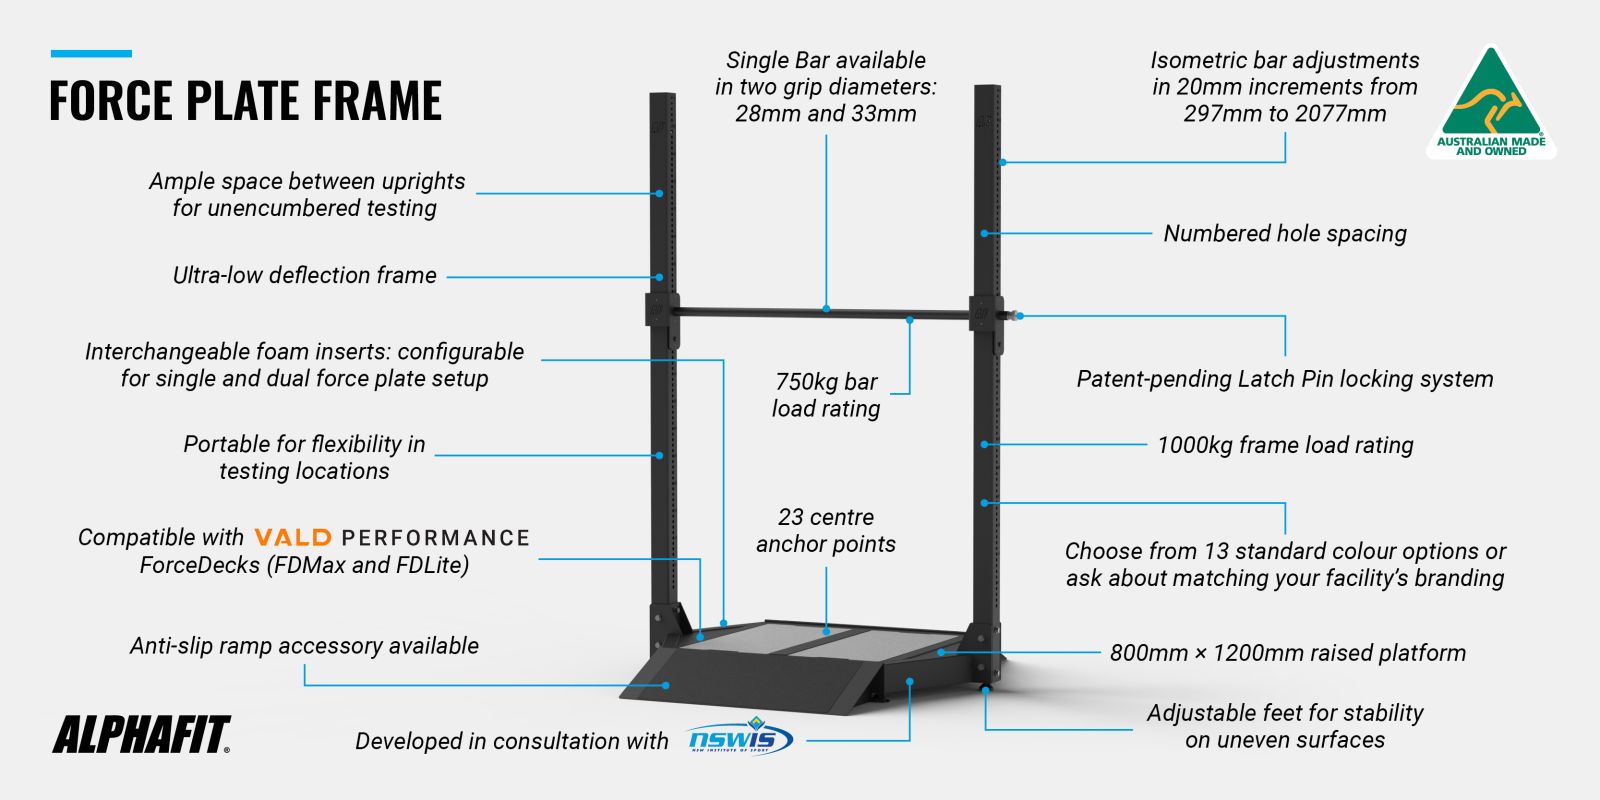 AlphaFit Force Plate Frame features and benefits callout image